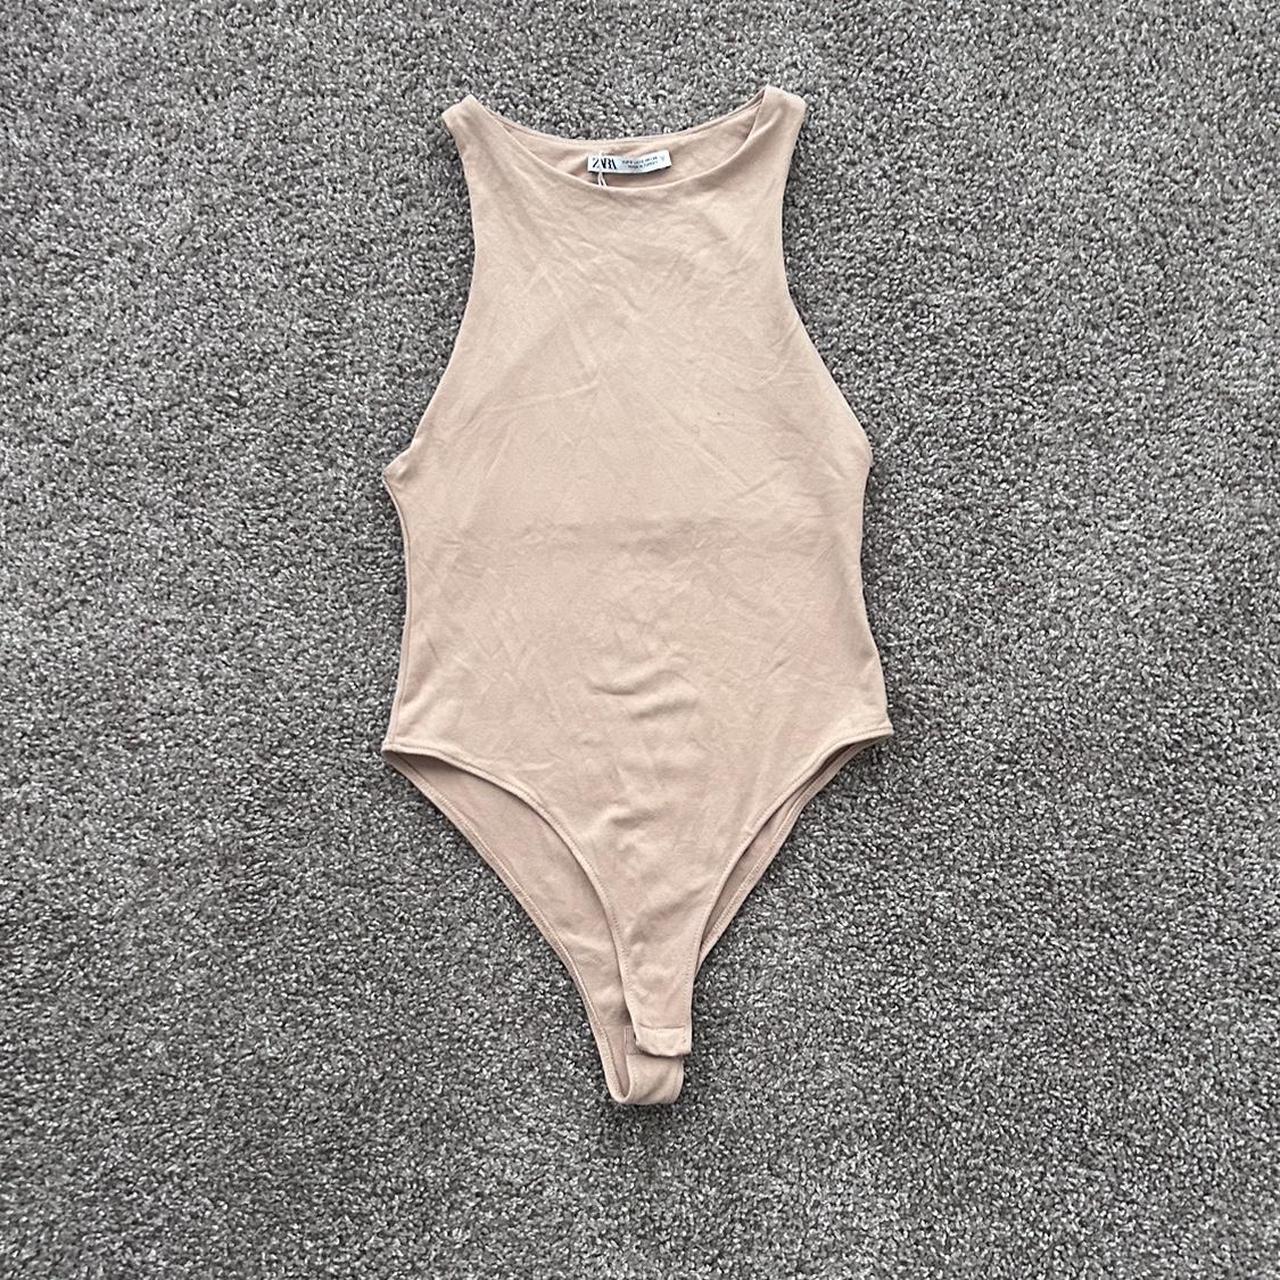 EXPRESS BODY CONTOUR COLLECTION NUDE BODYSUIT NWT - Depop